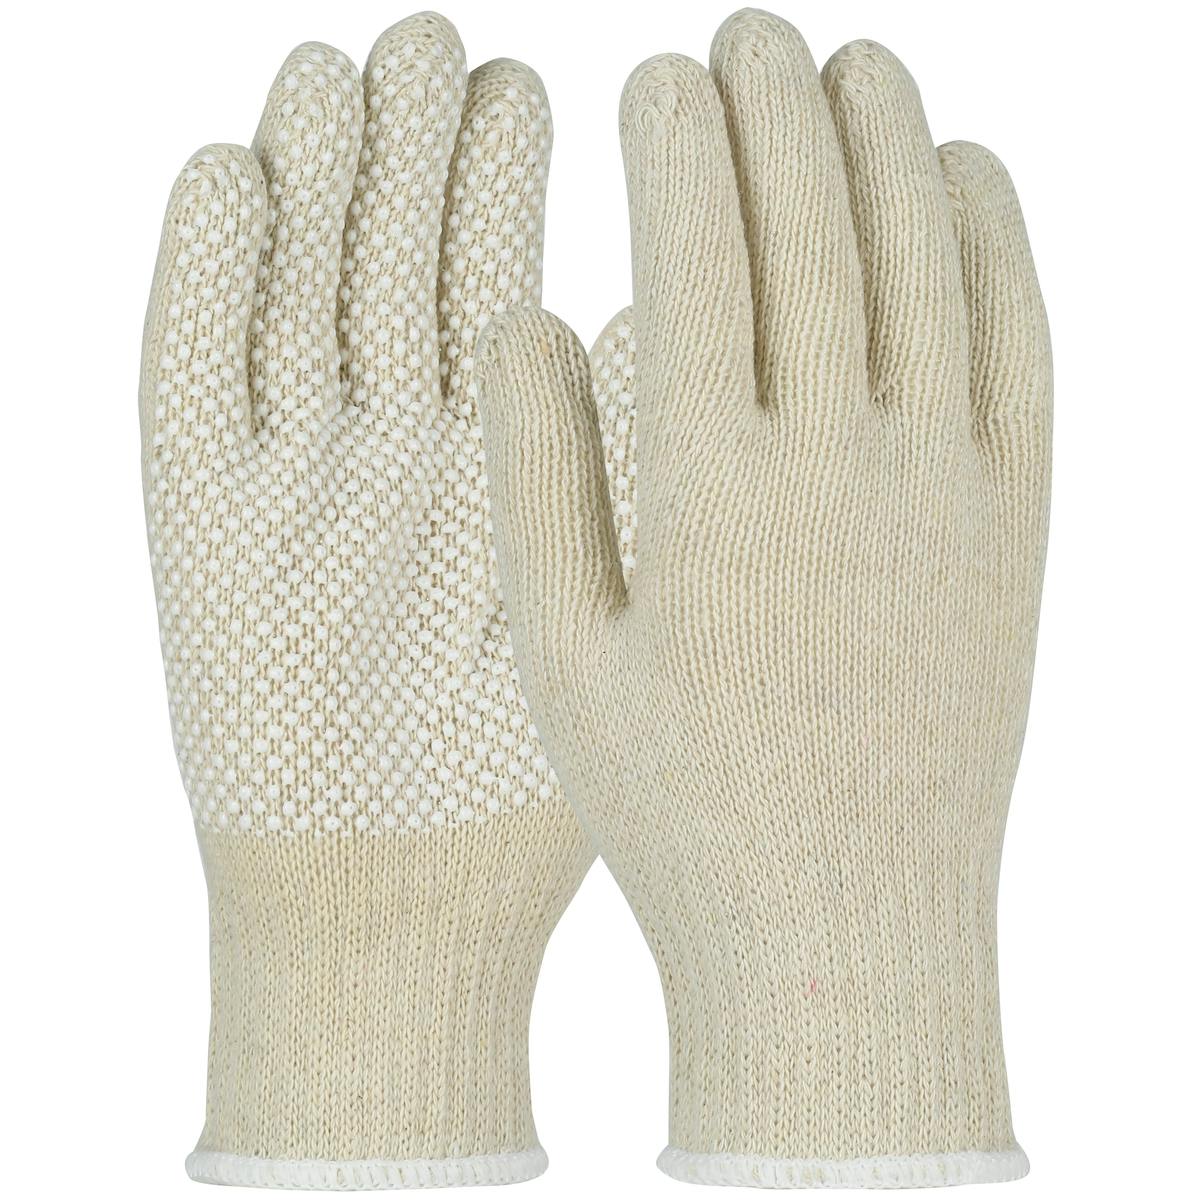 Heavy Weight Seamless Knit Cotton/Polyester Glove with PVC Dotted Grip, White (MU30-WHPD1) - S